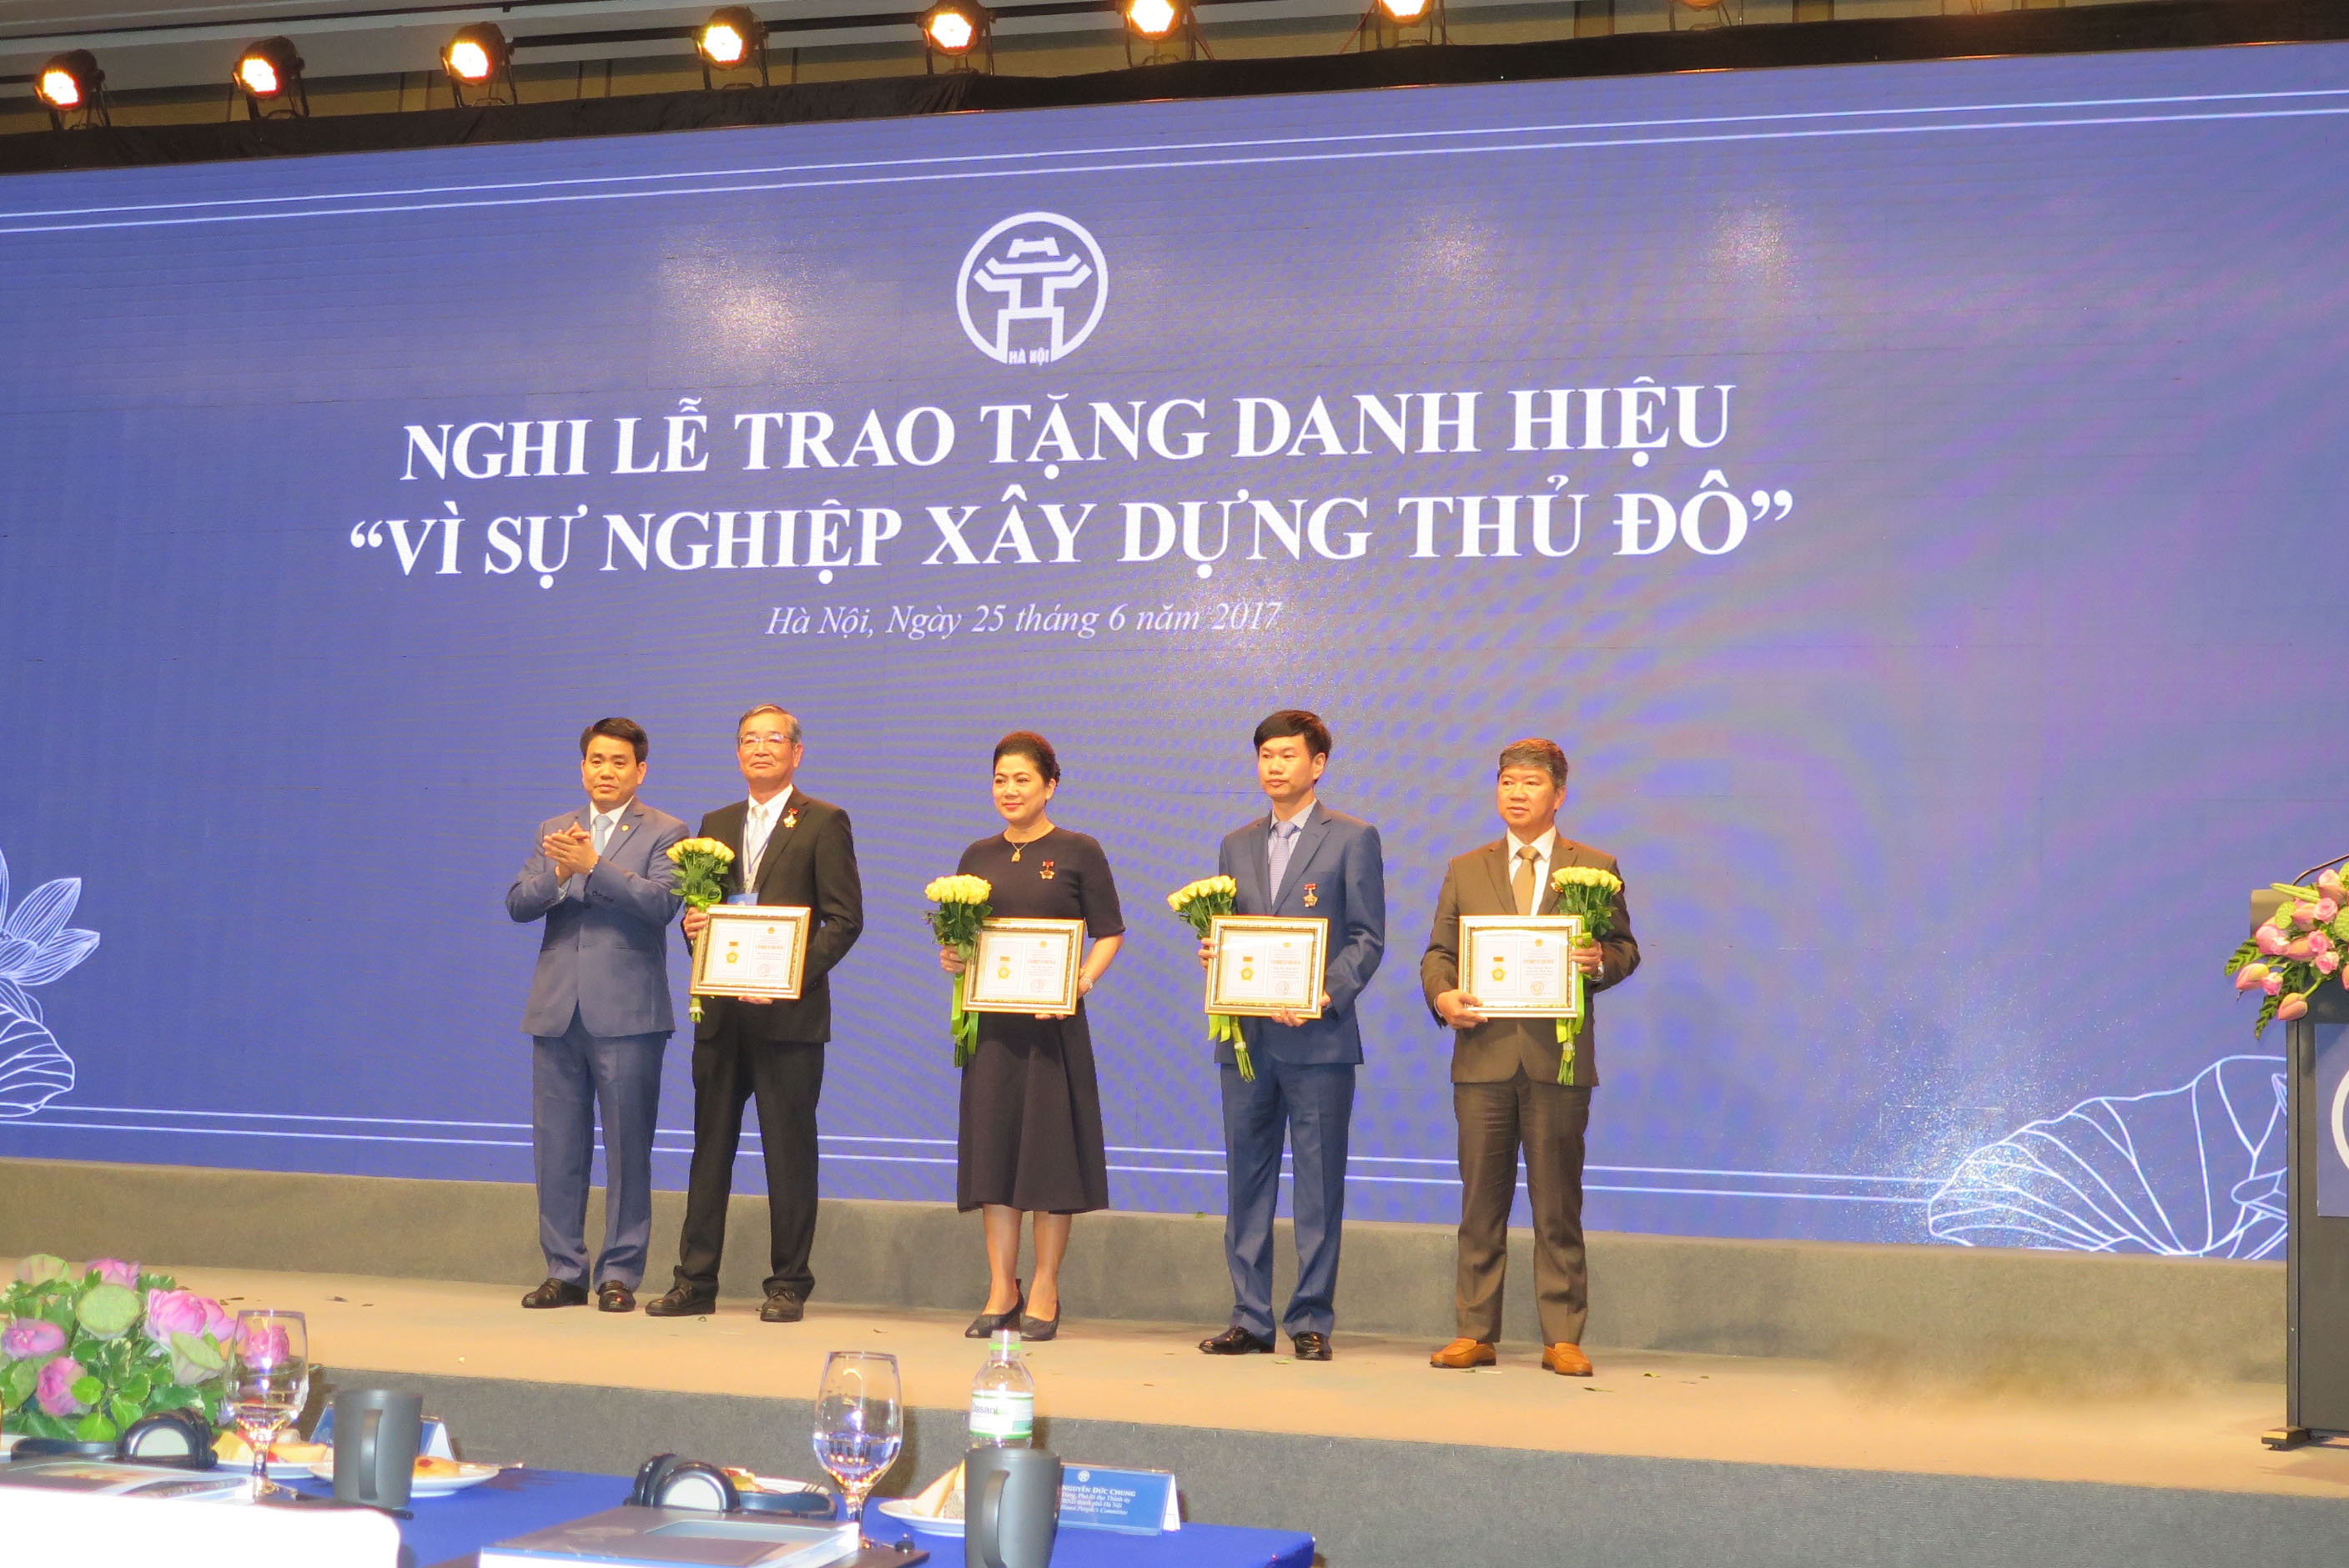 AEON chairman awarded “For the cause of Hanoi” title